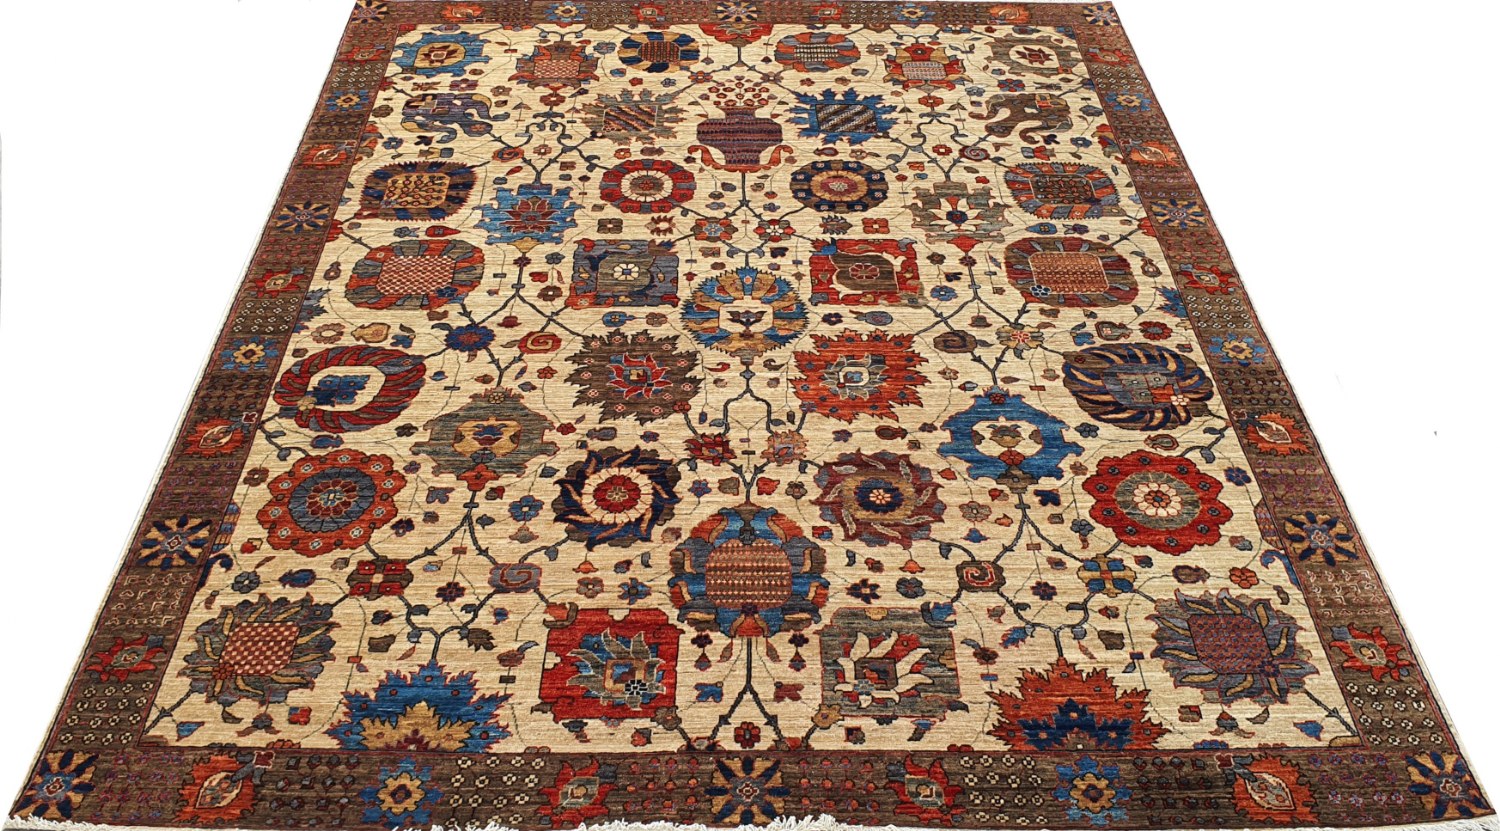 8x10 Aryana & Antique Revivals Hand Knotted Wool Area Rug - MR028176